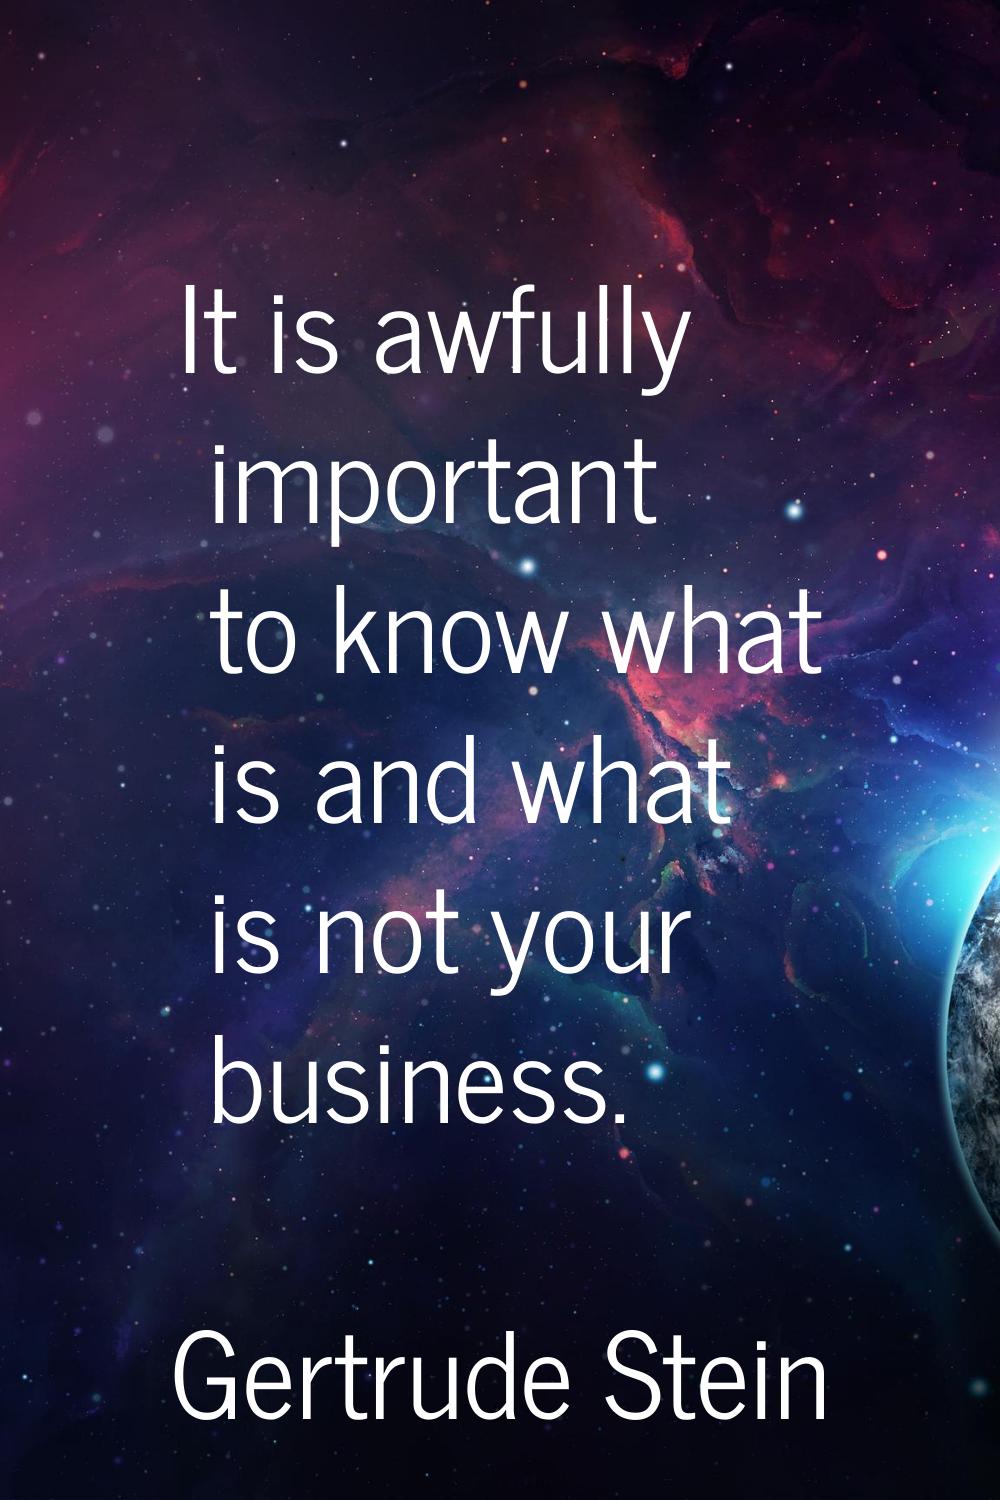 It is awfully important to know what is and what is not your business.